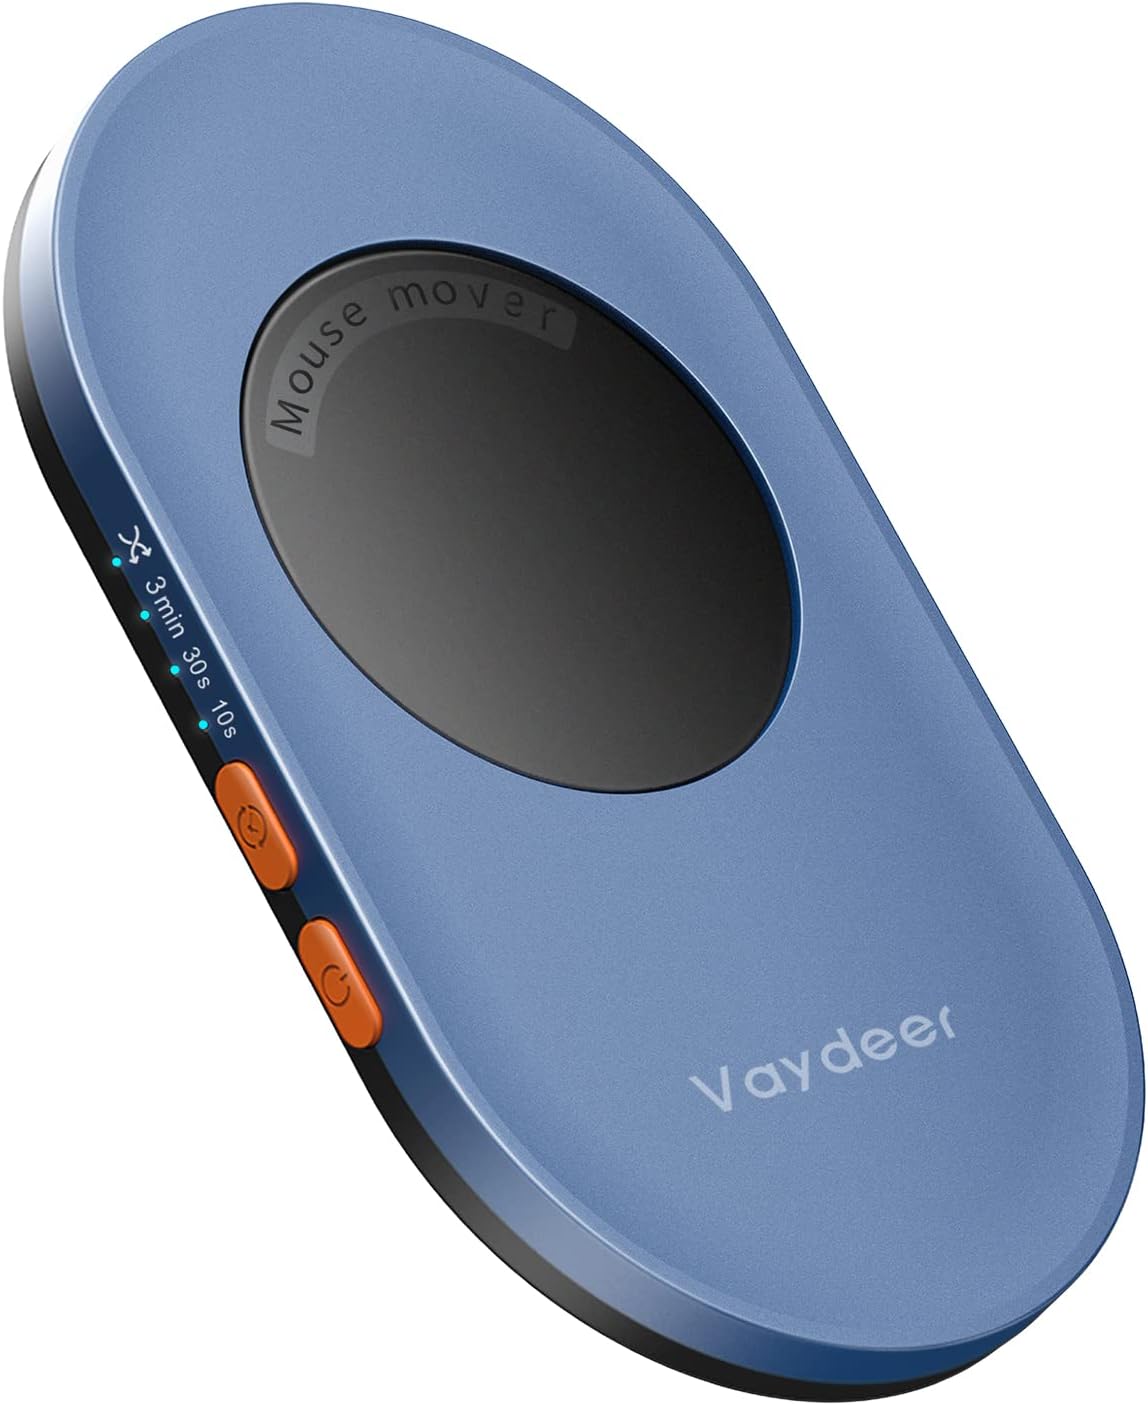 Vaydeer Ultra Slim Mouse Mover with Adjustable Interval Timer, Undetectable & Noiseless Jiggler Simulates Realistic Movement, Driver-Free Shaker for Keeping the PC Active $12.87